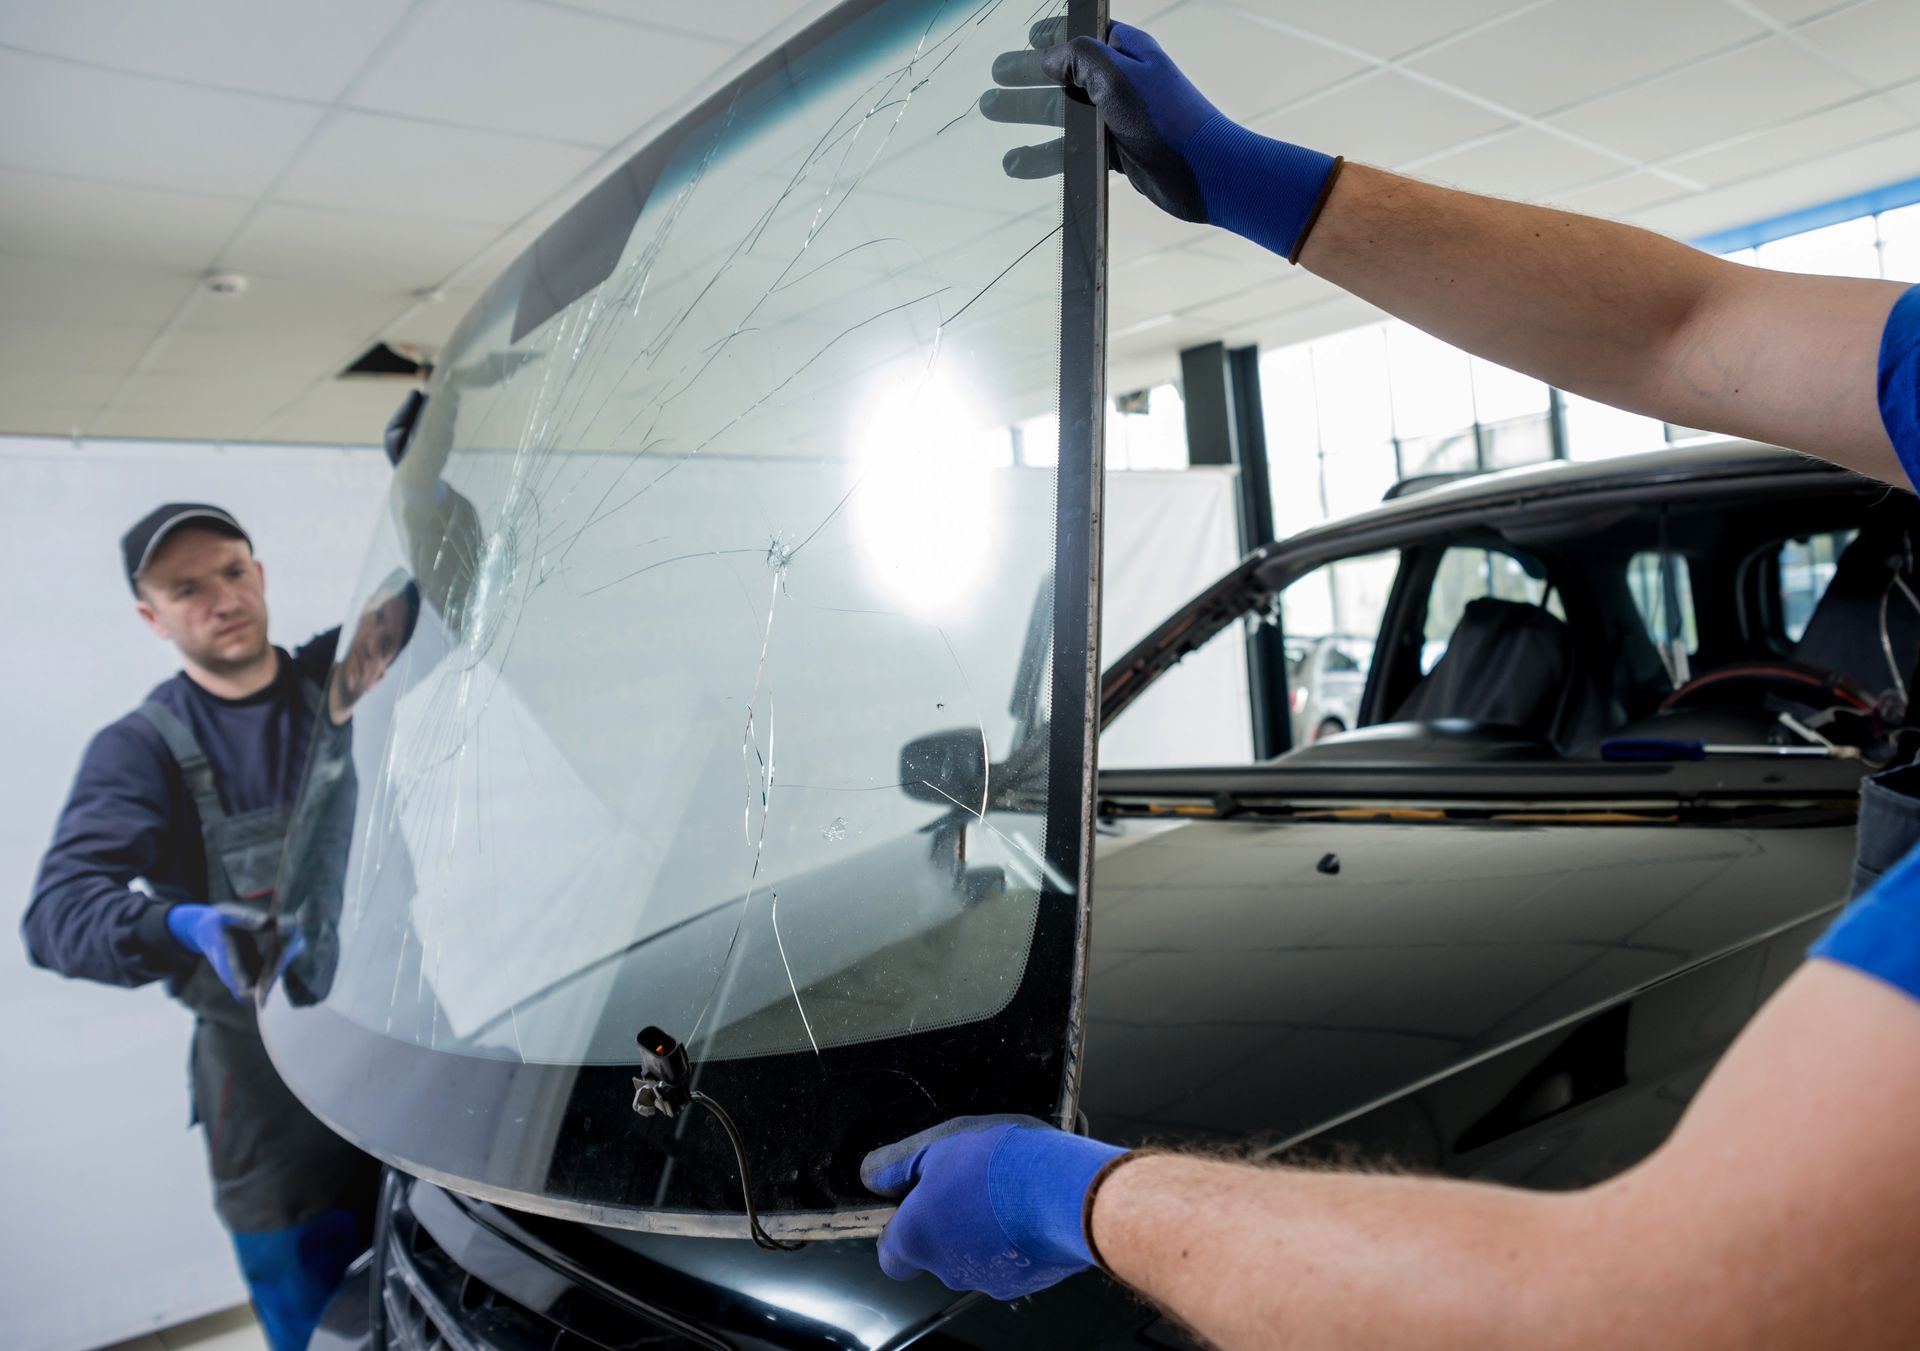 Two men are installing a windshield on a car.